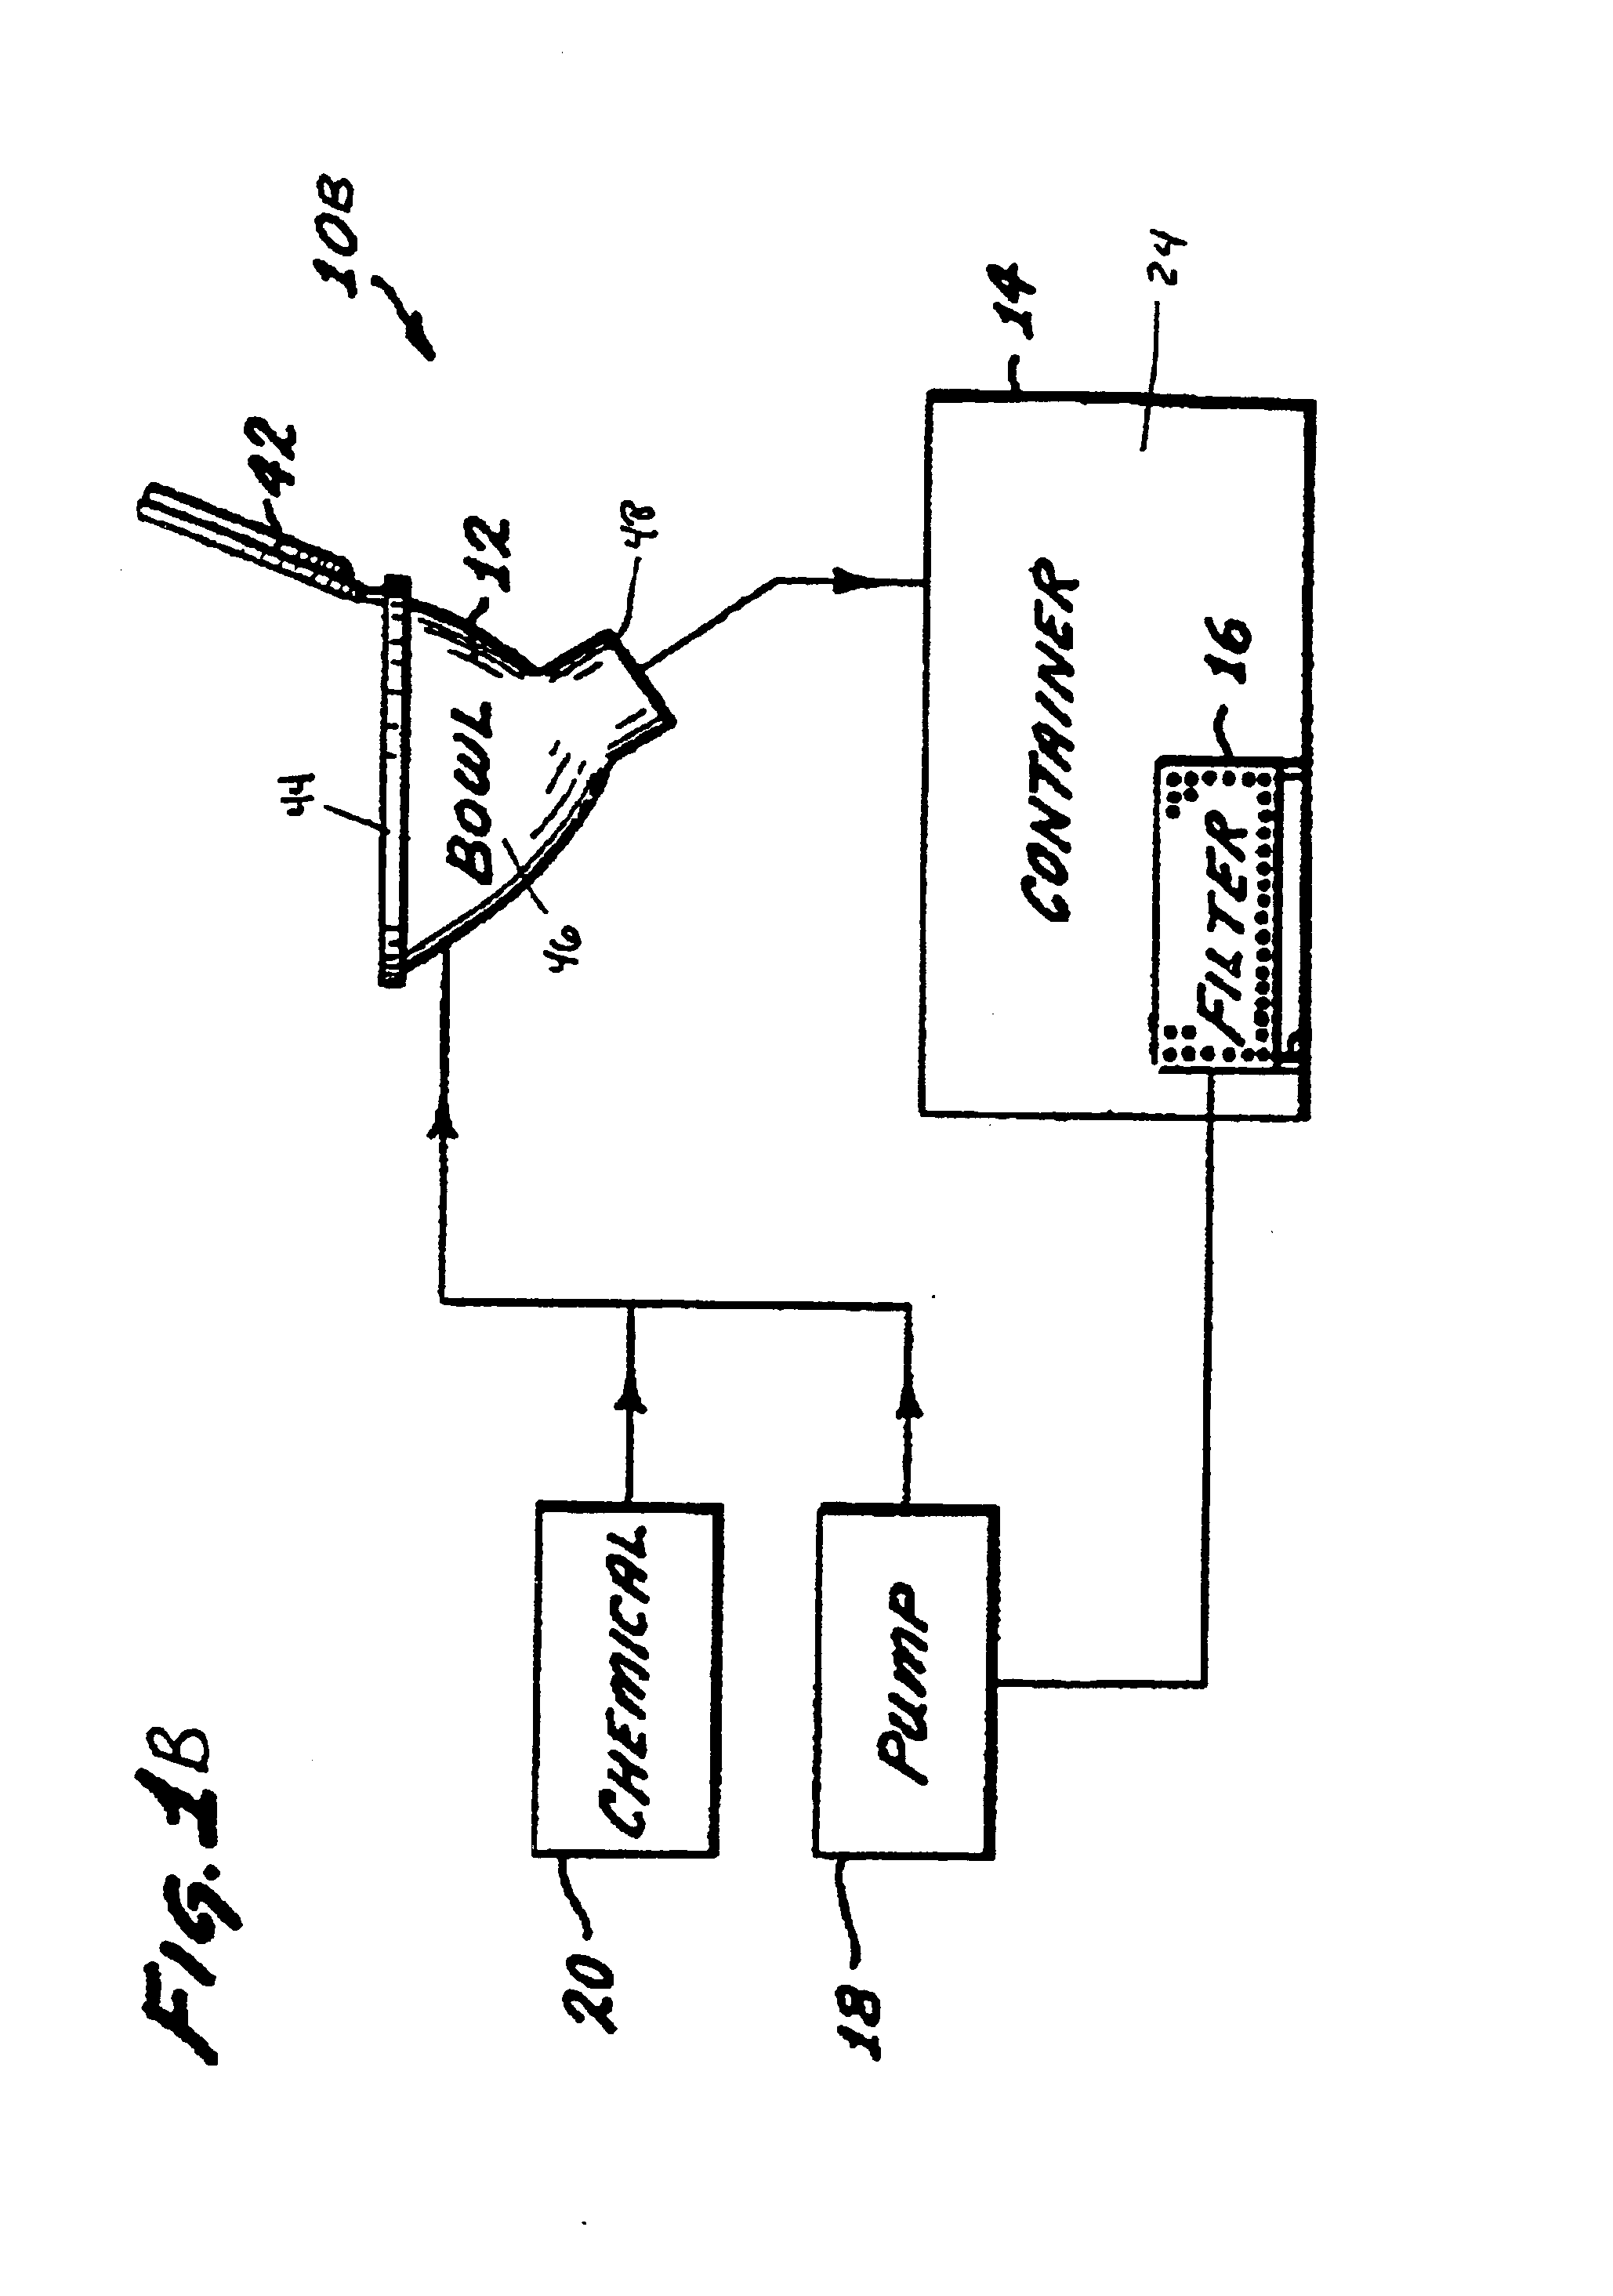 Method for bacterially treating tank toilet systems and apparatus for using same